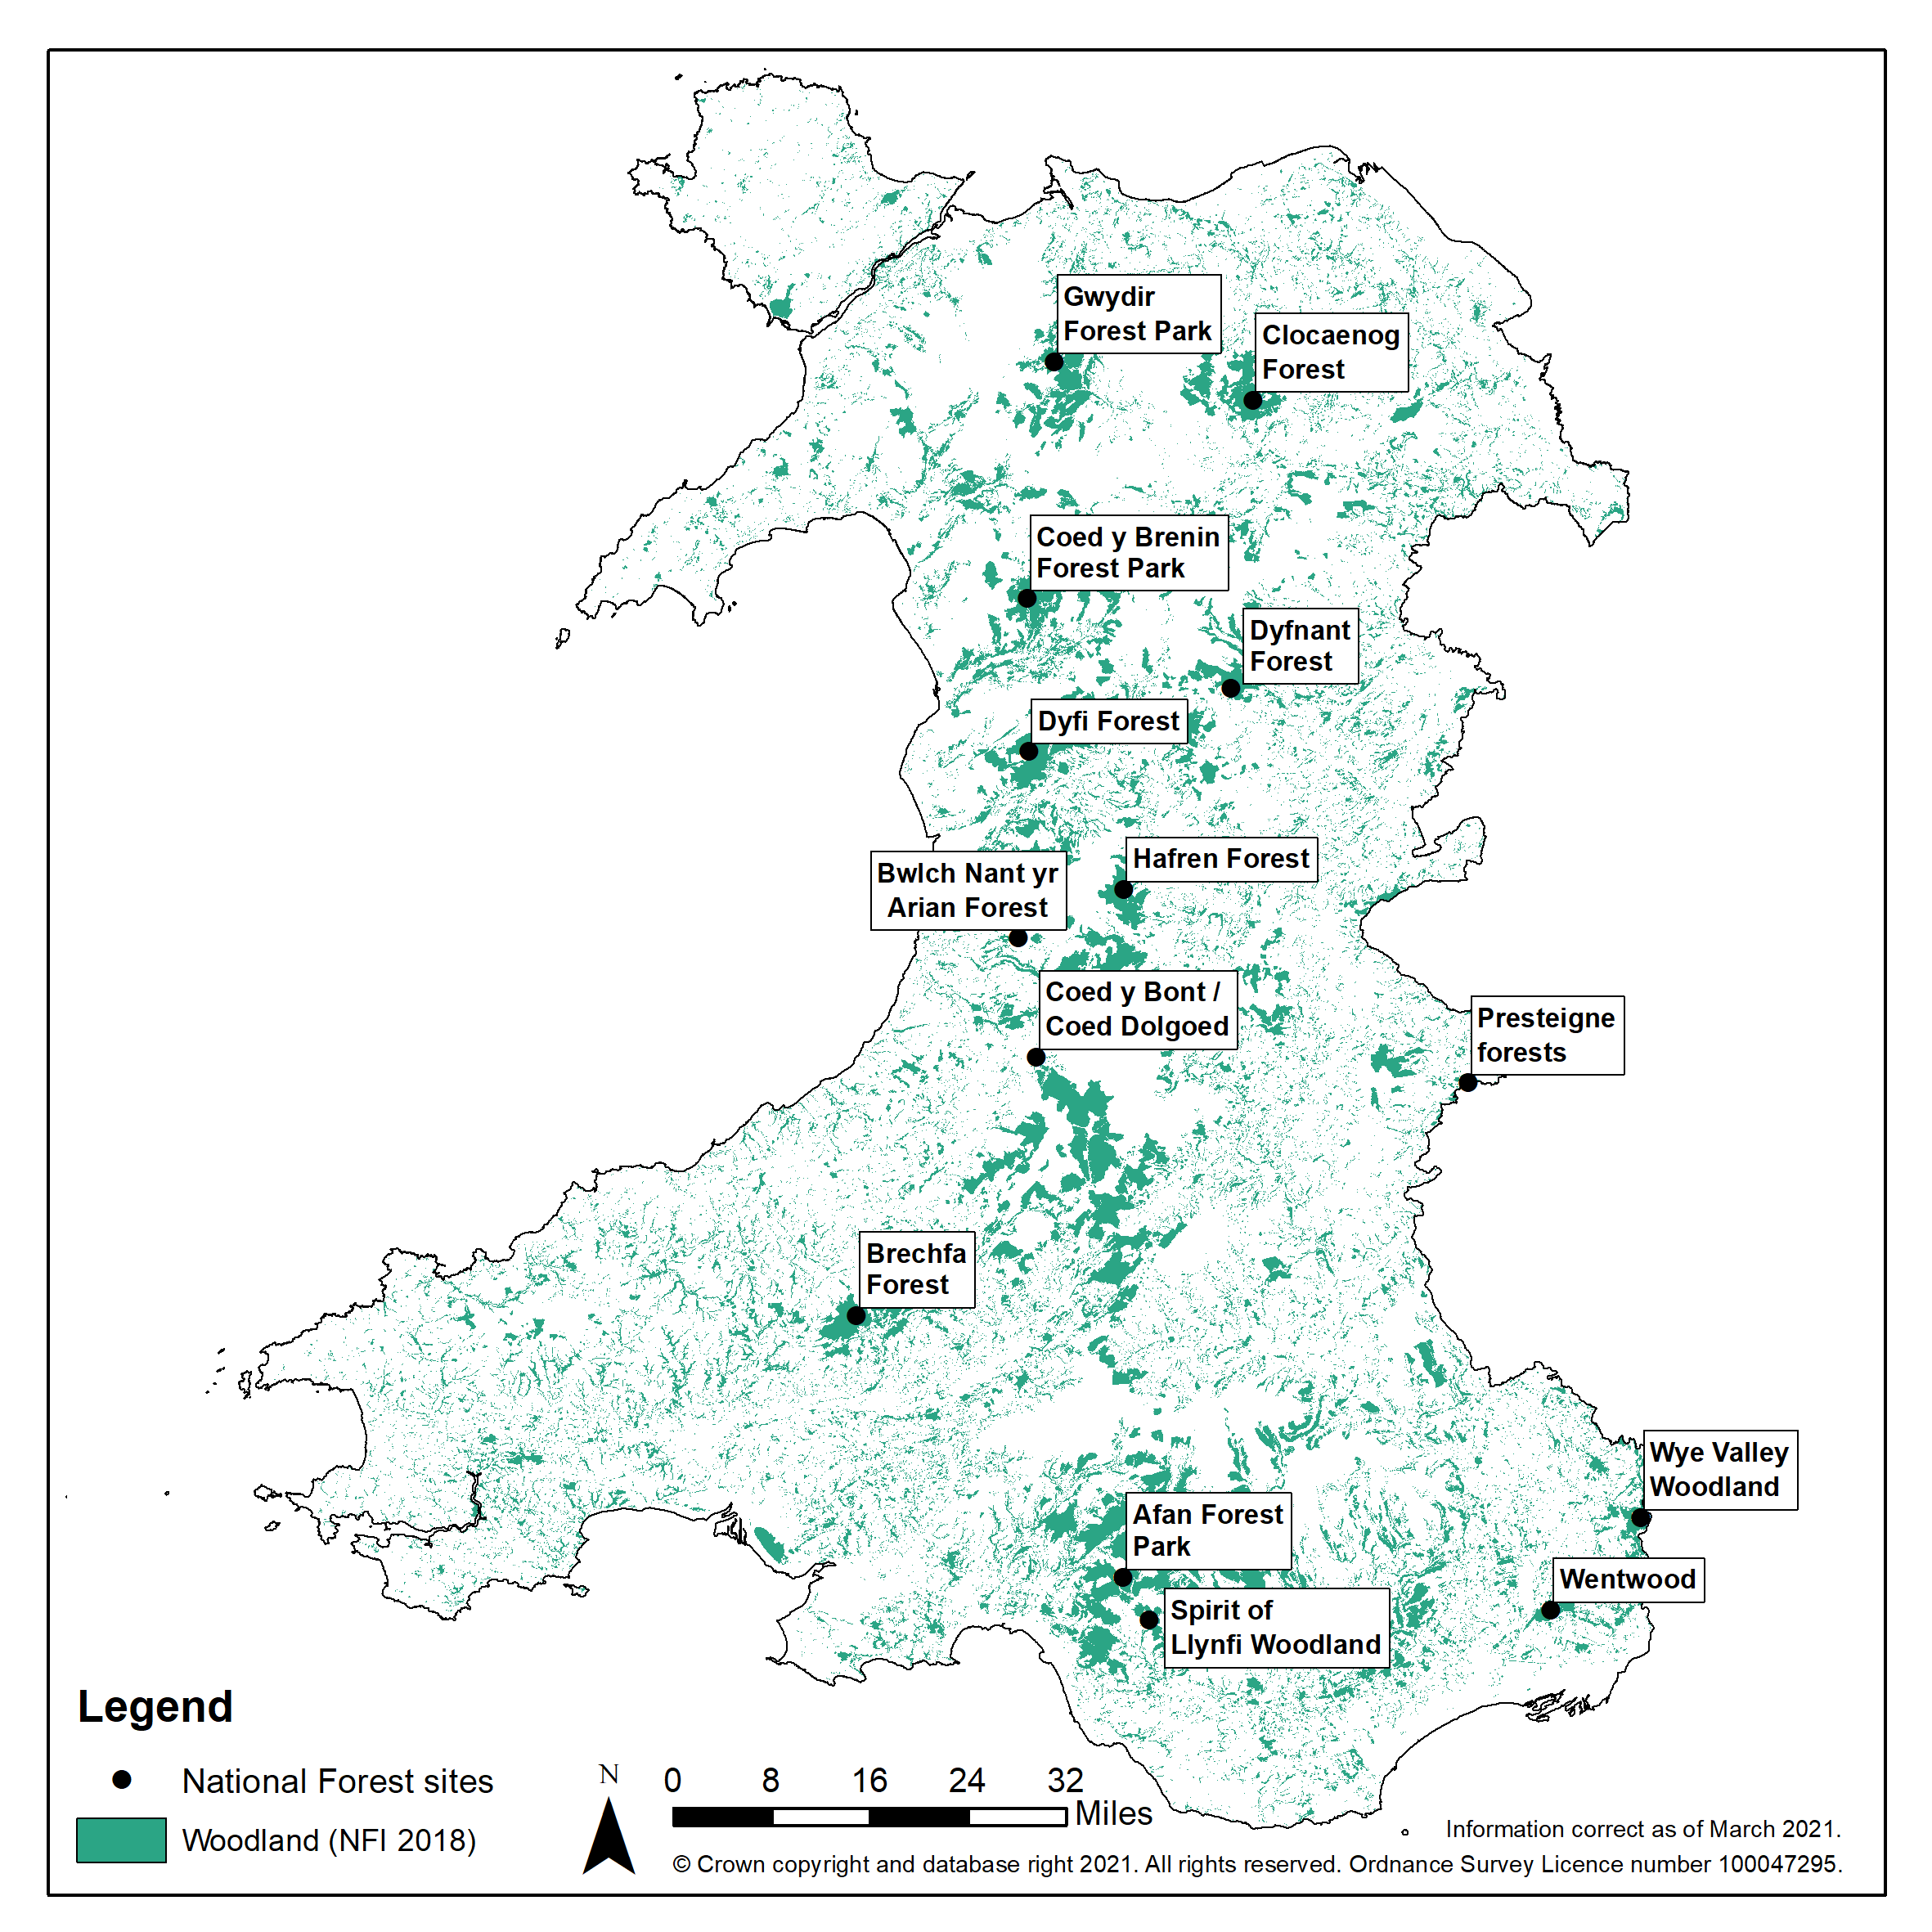 Map of Wales showing the areas covered by woodland as well as the first 14 sites that have been selected to form the National Forest.